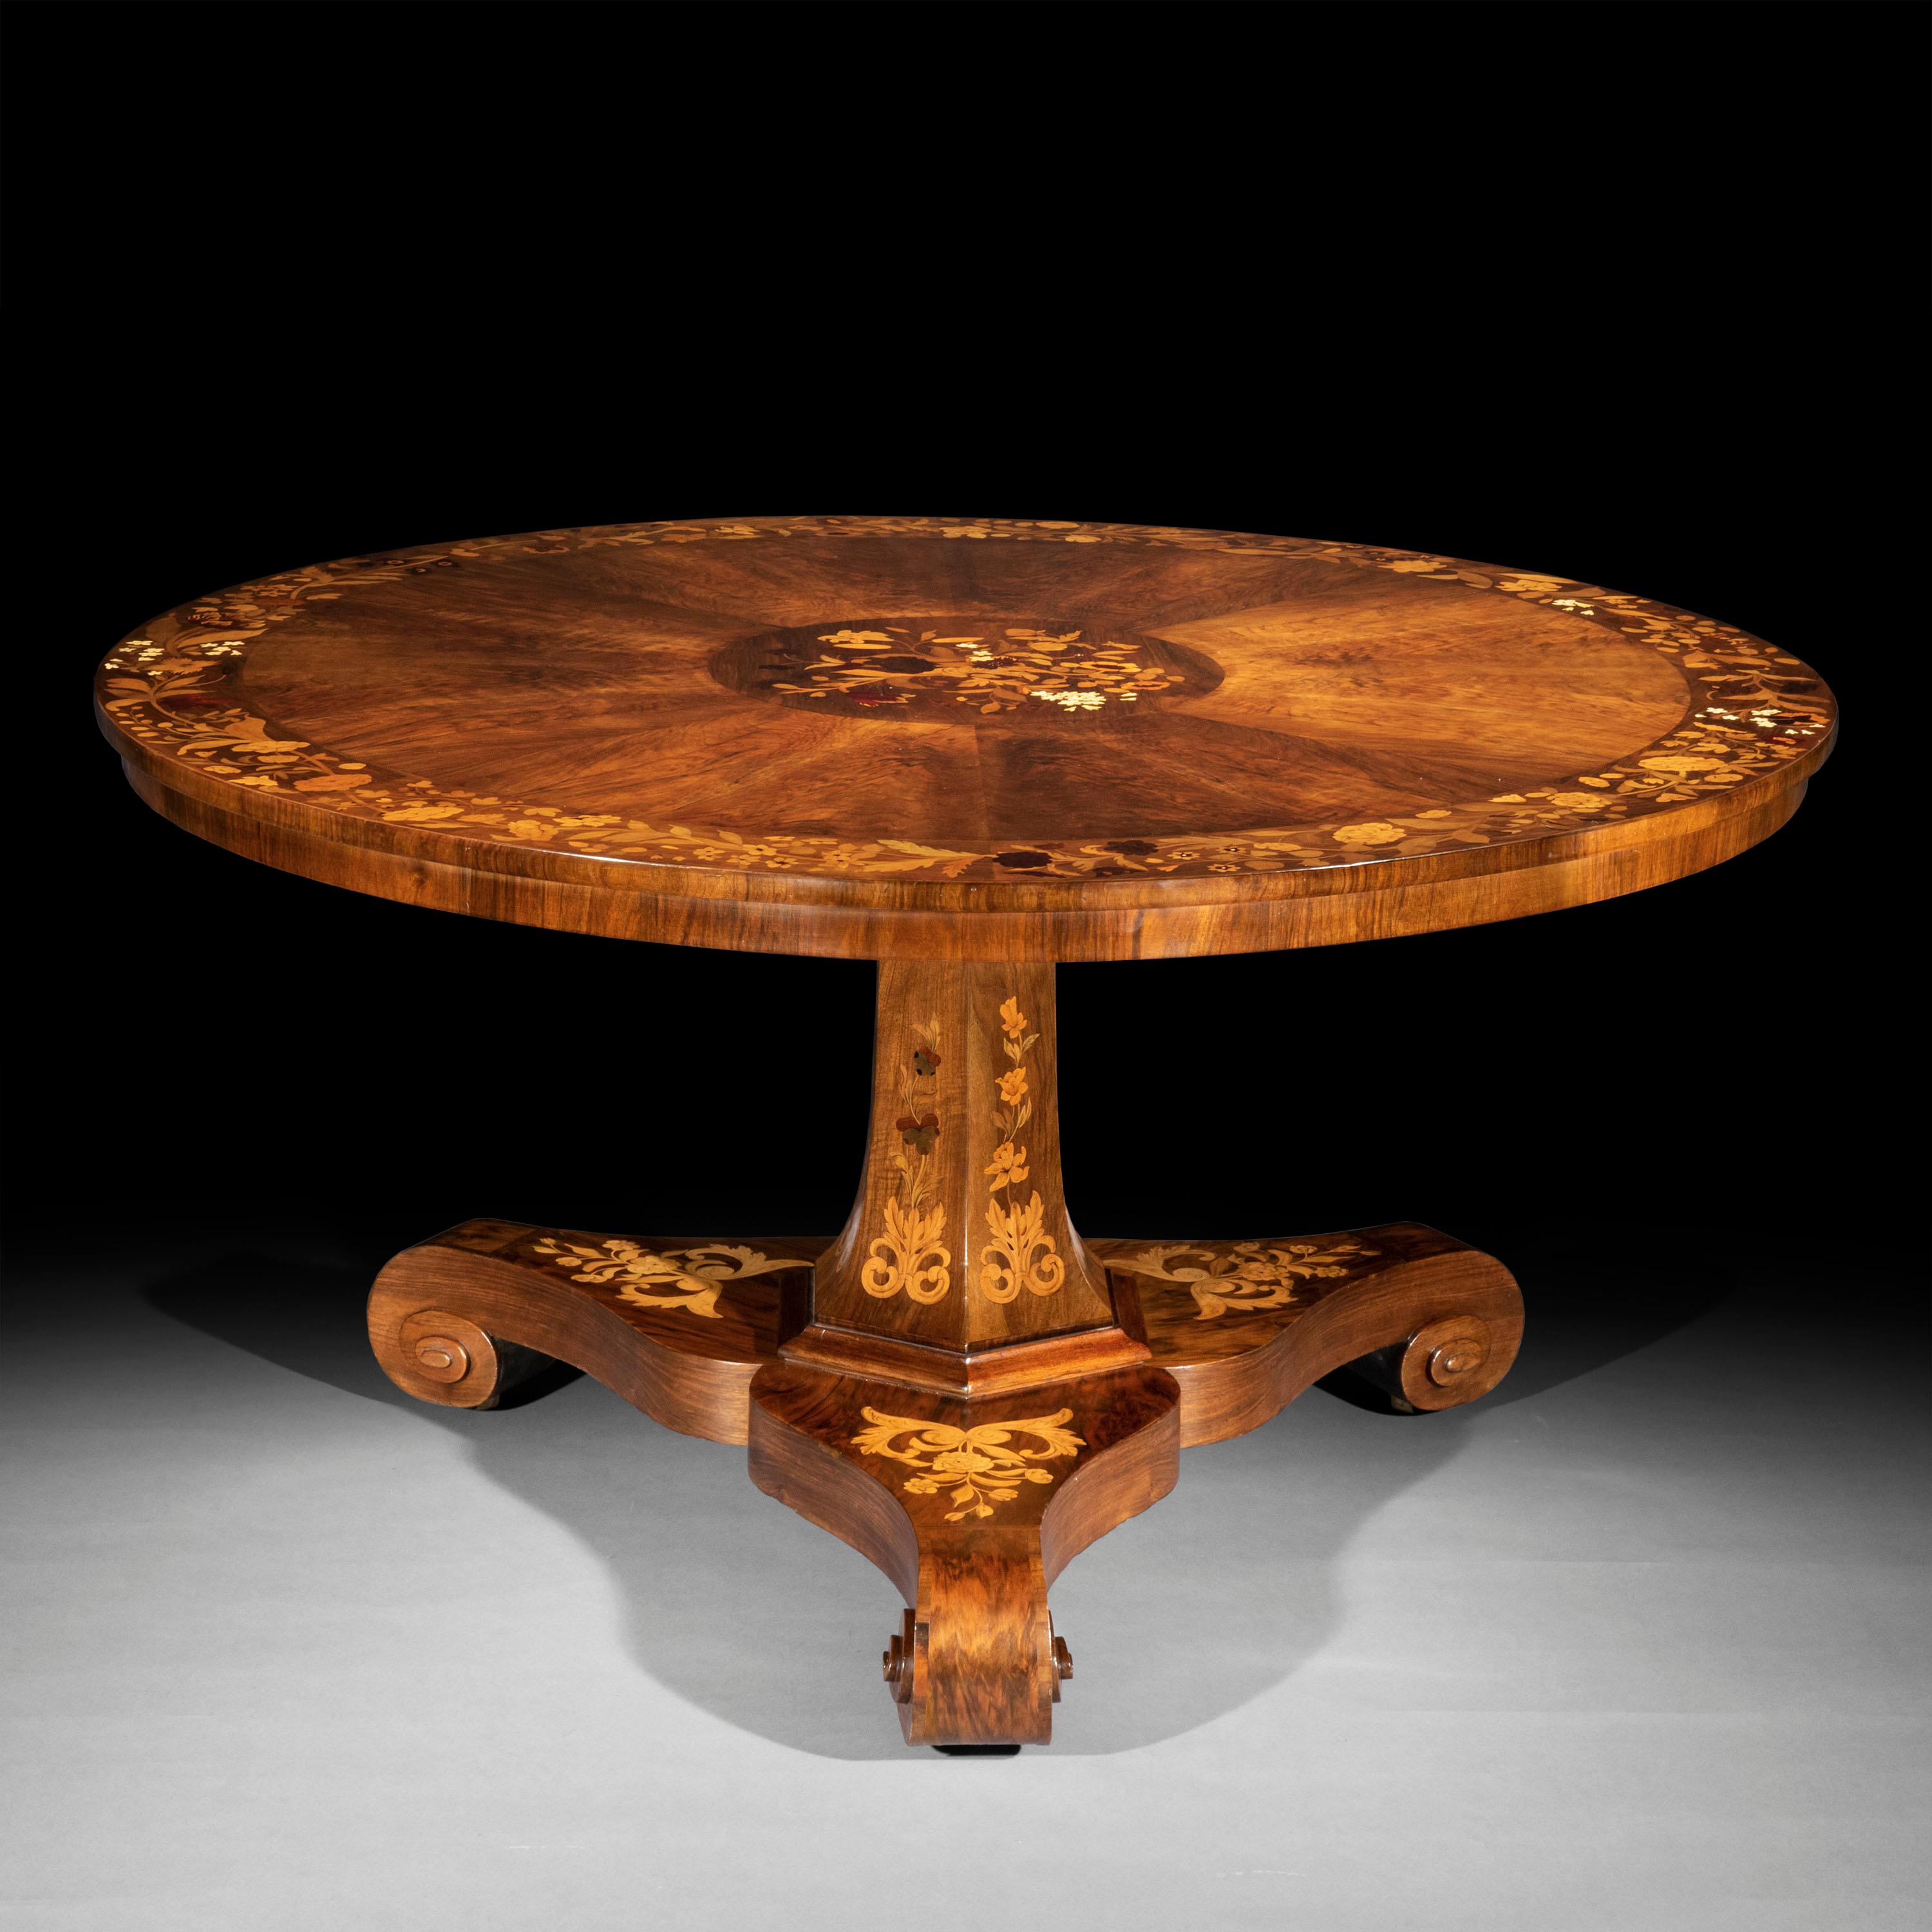 A splendid Late Regency - William IV period pedestal dining table in figured walnut, exquisitely decorated throughout with floral marquetry inlays in various exotic veneers and bovine bone.

England, circa 1835.

Why we like it

This table is of